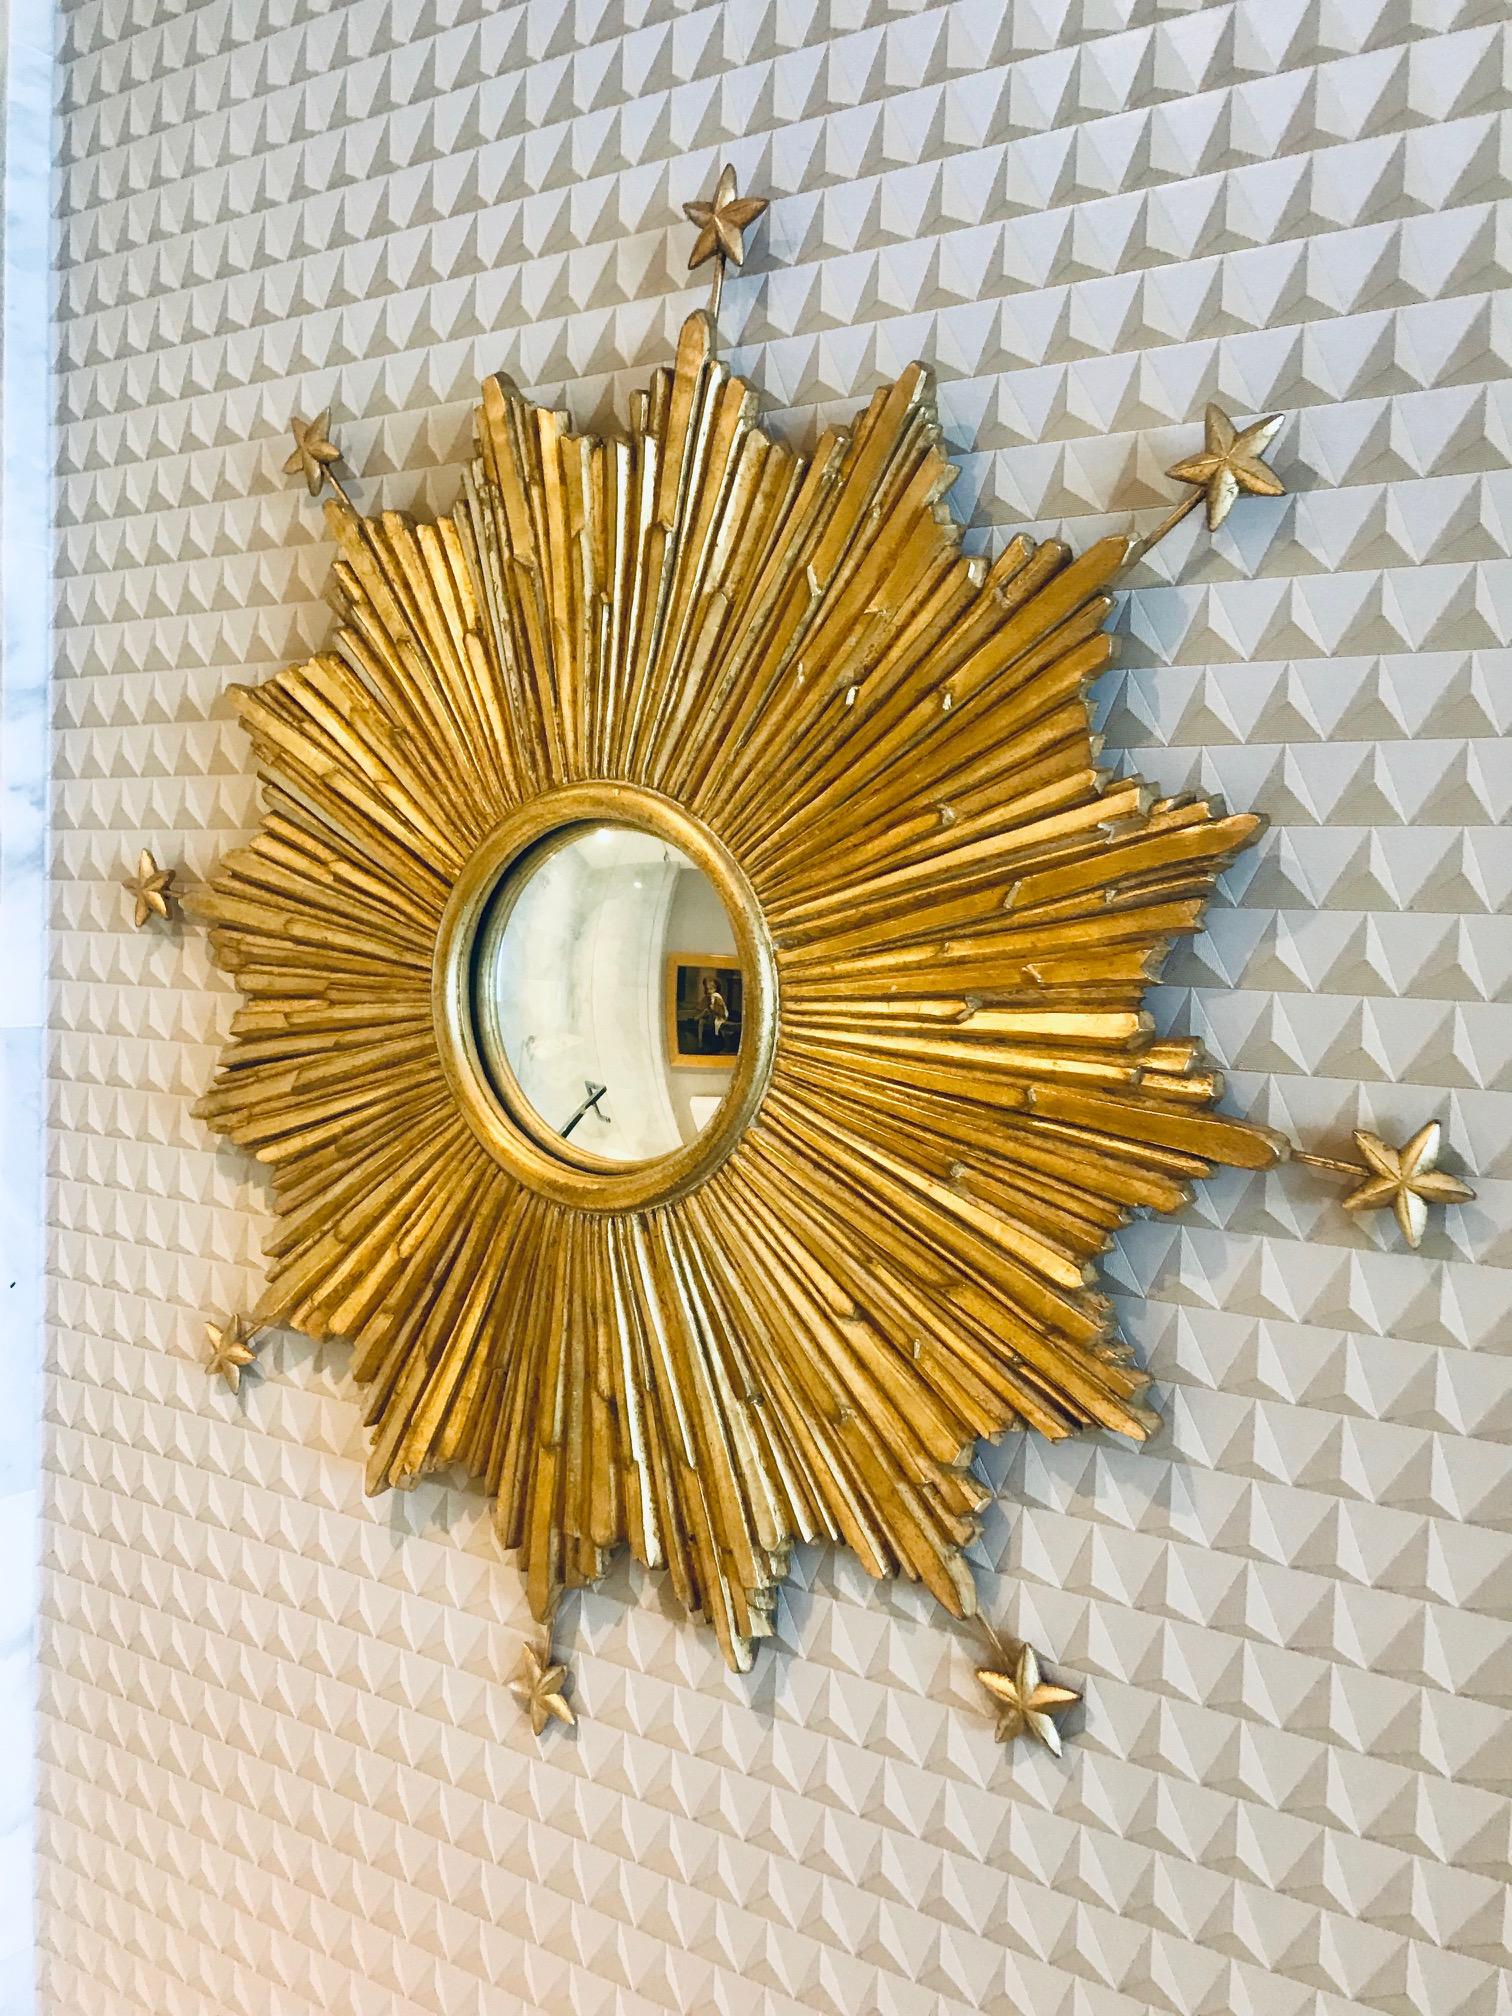 Exquisite sunburst mirror with extended star accents. Hand made by artisans using casting technique of wood, resin, and wire to create three dimensionality form. Features a central convex mirror and hand laid antique gold leaf finish.